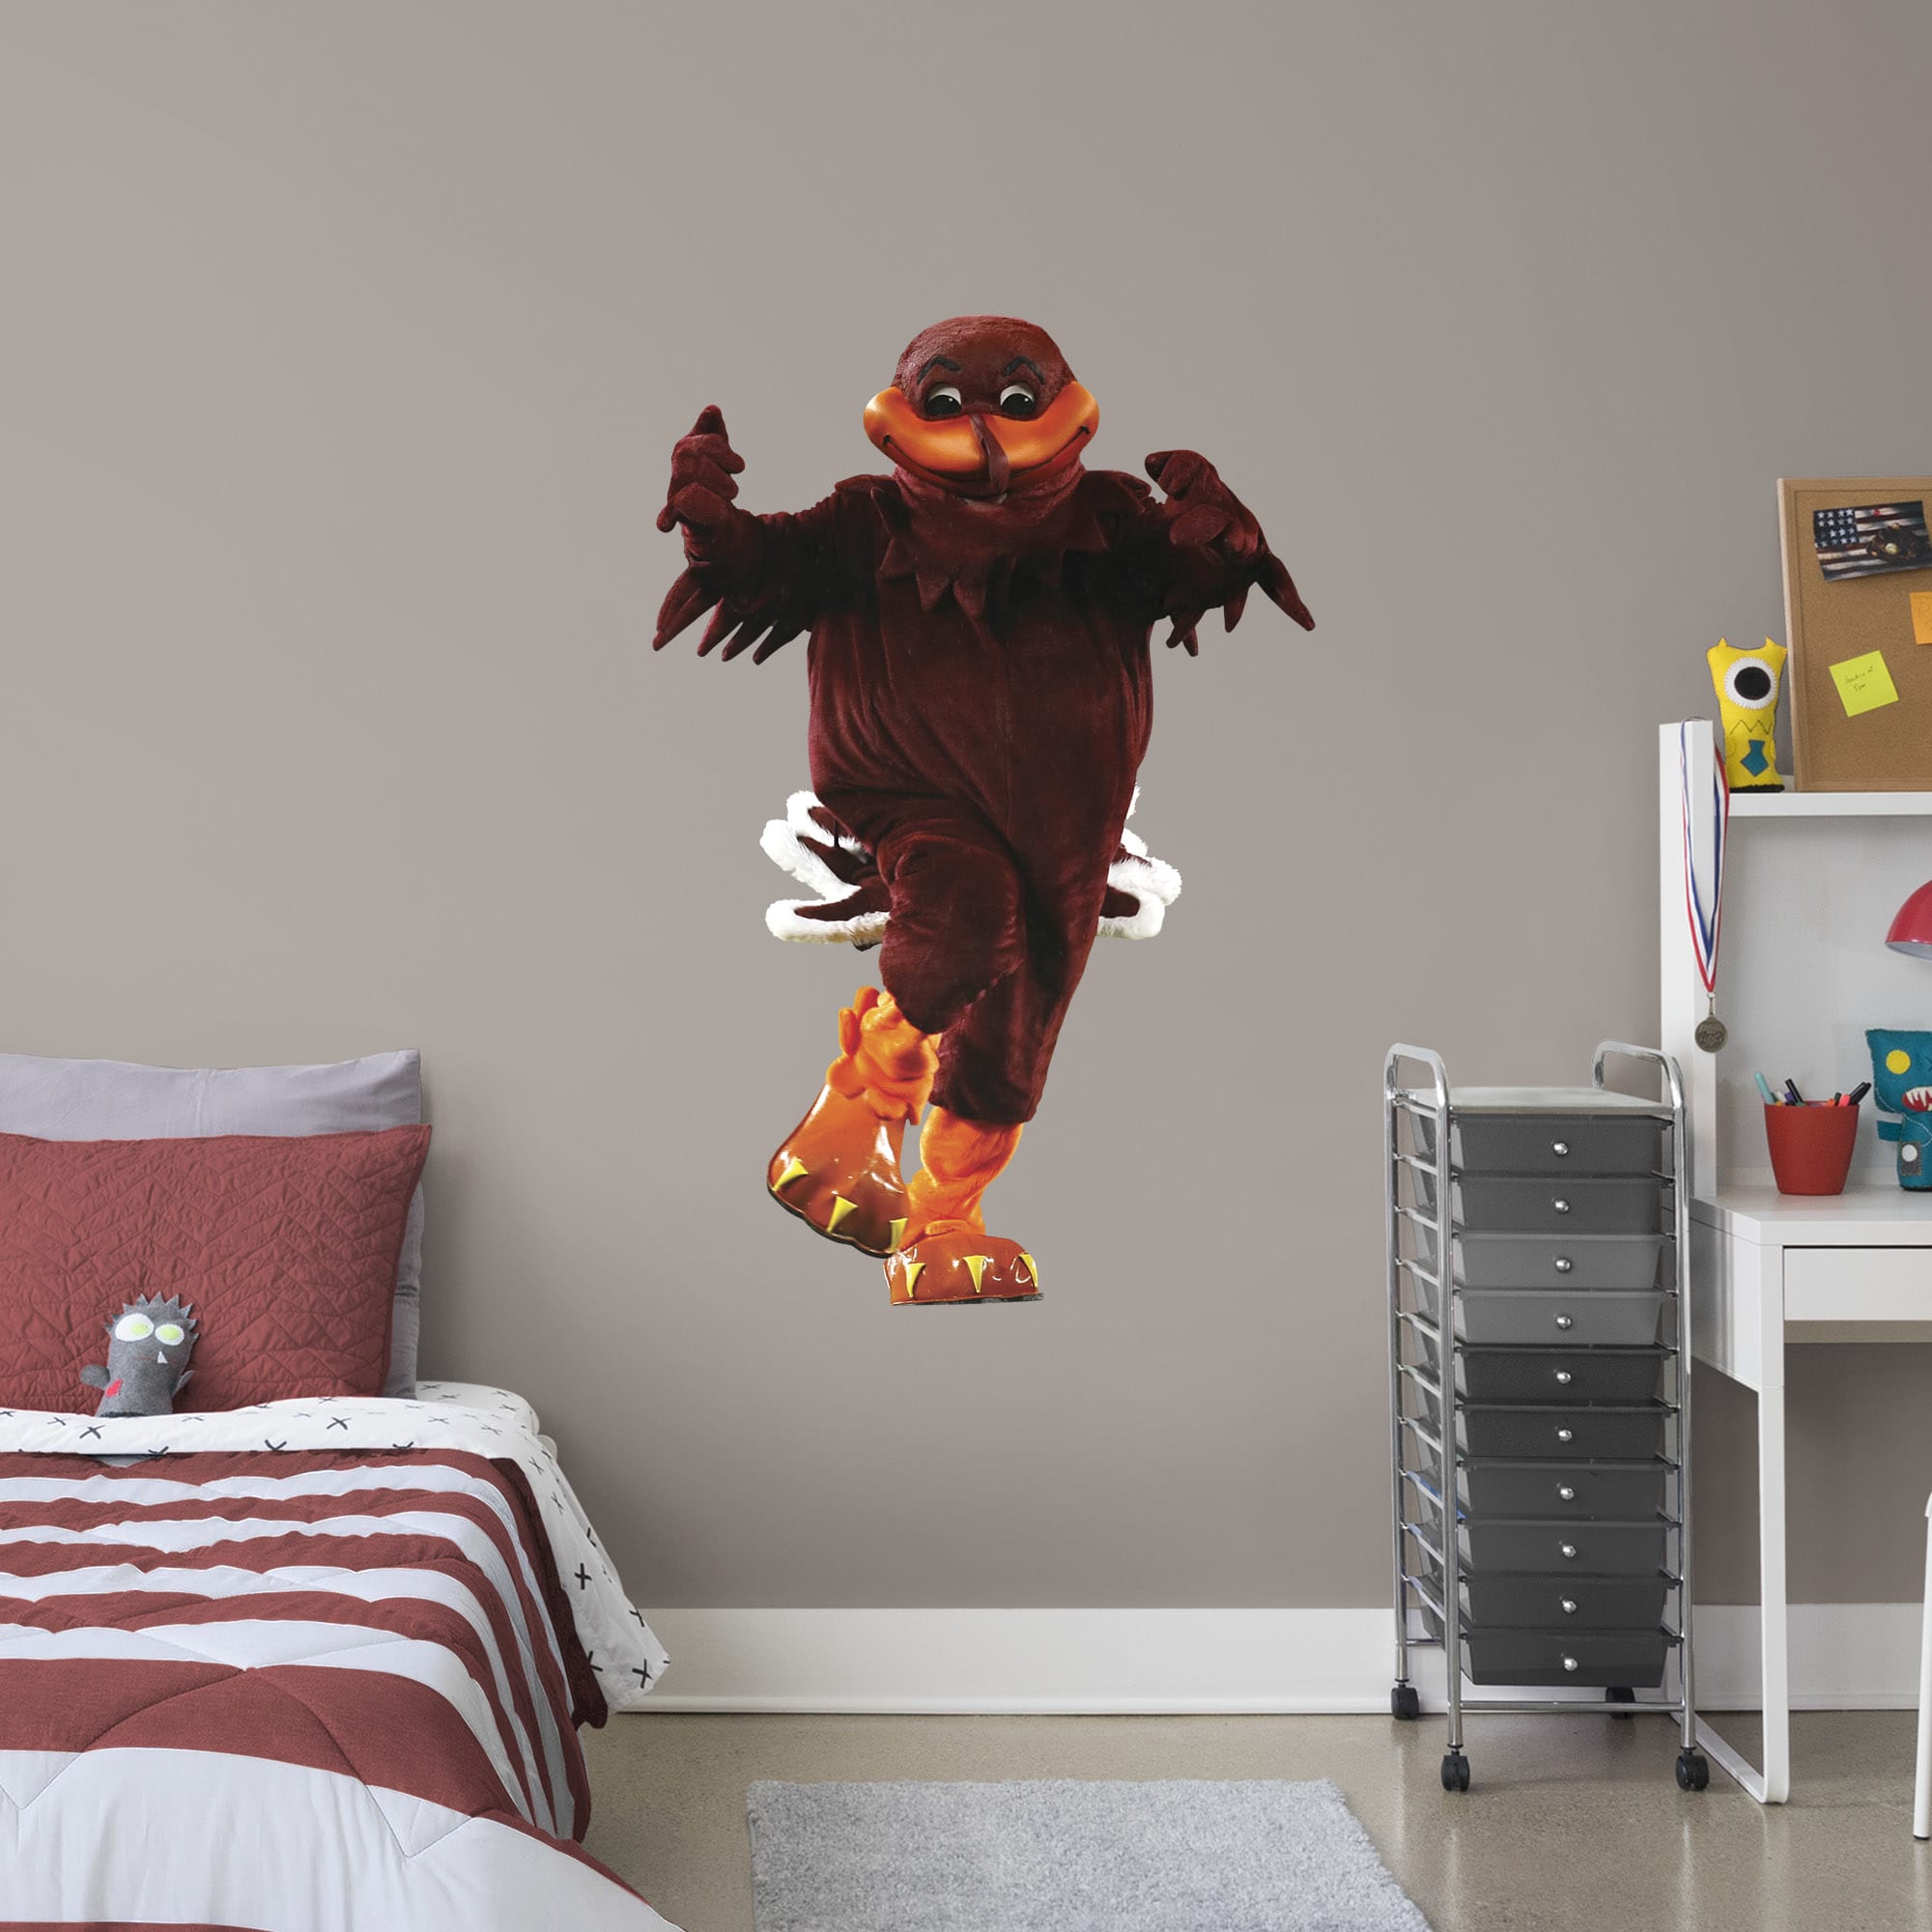 Virginia Tech Hokies: Hokiebird Mascot - Officially Licensed Removable Wall Decal Giant Mascot + 2 Decals (33"W x 51"H) by Fathe